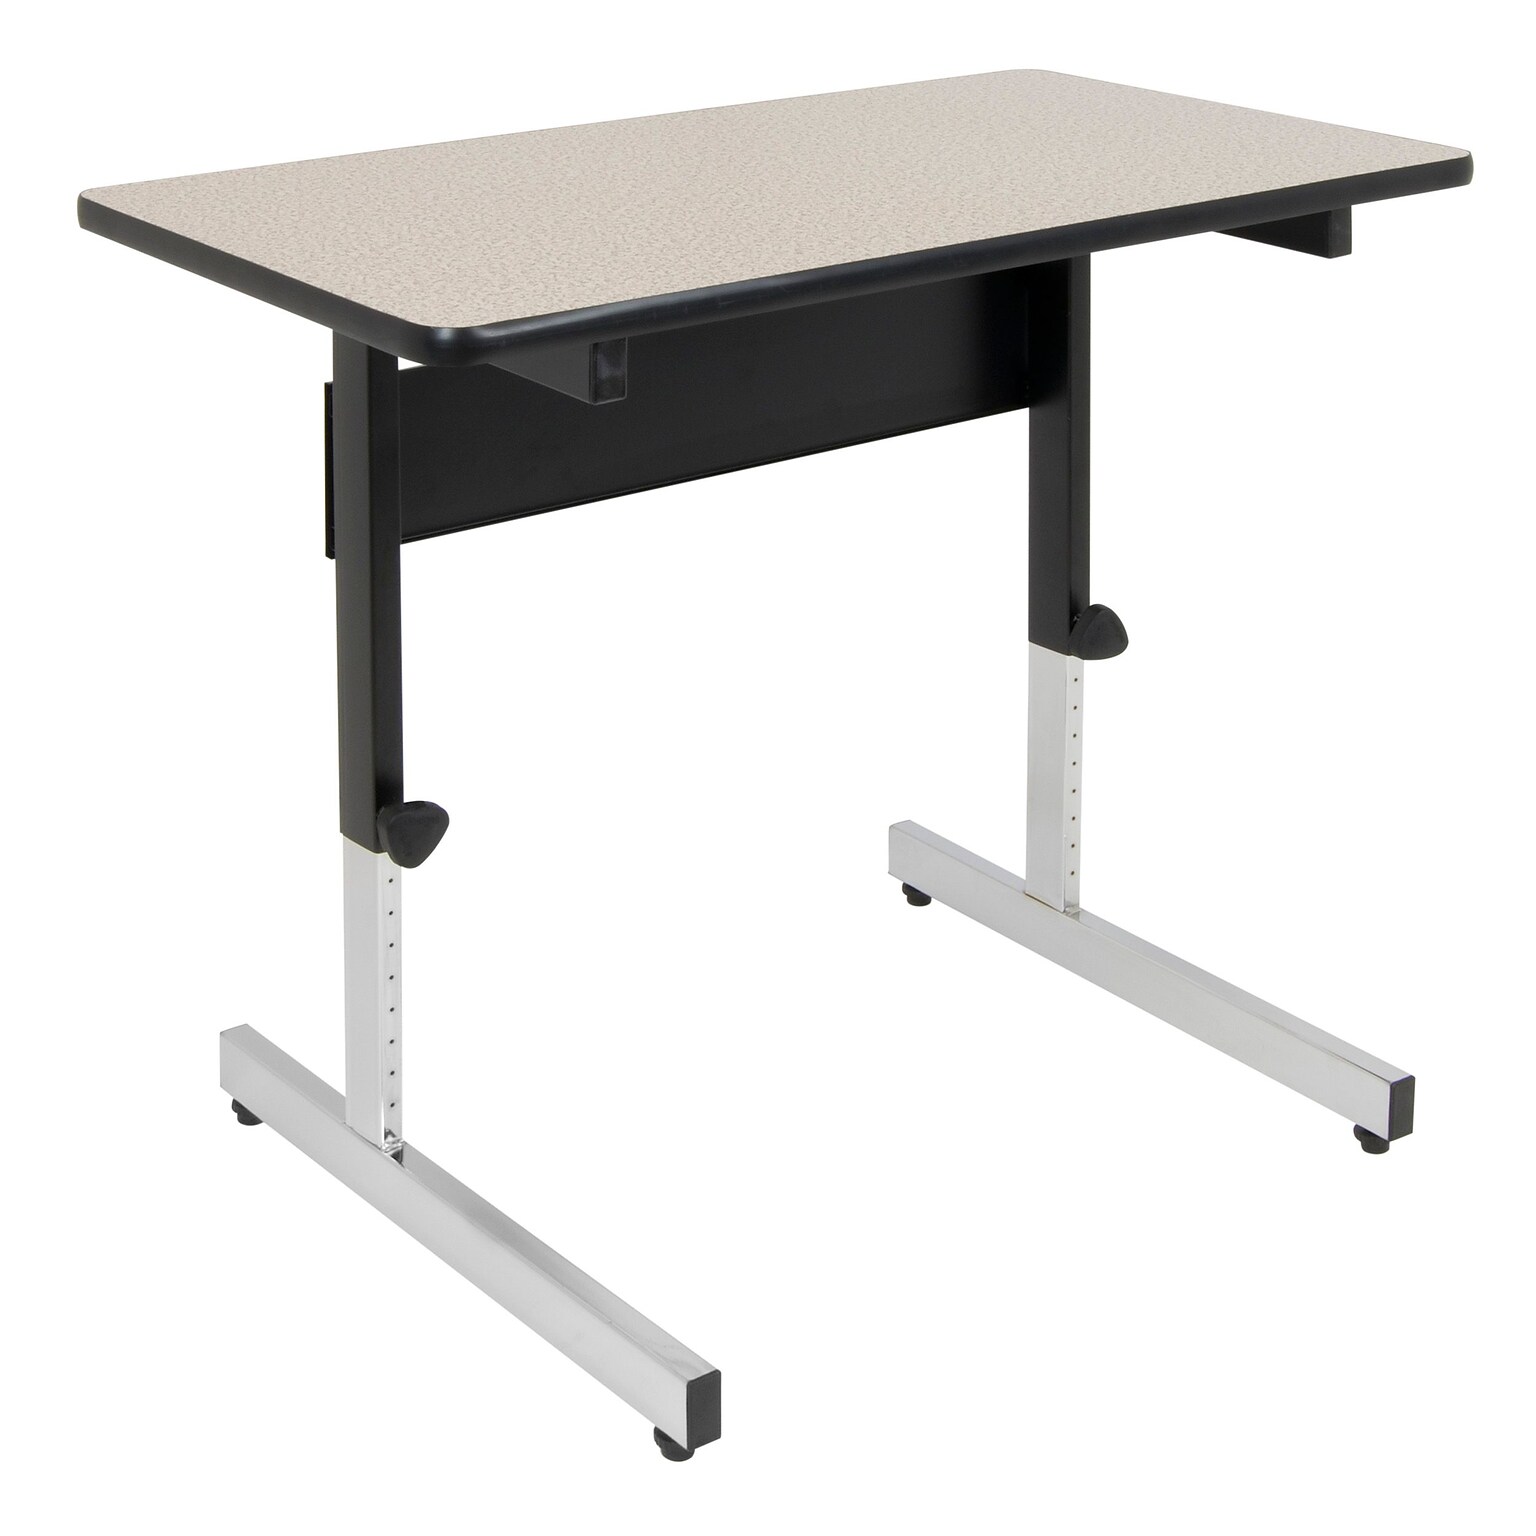 Studio Designs Adapta Square Activity Table, 36 x 22.25, Height Adjustable, Black and Spatter Gray (410381)